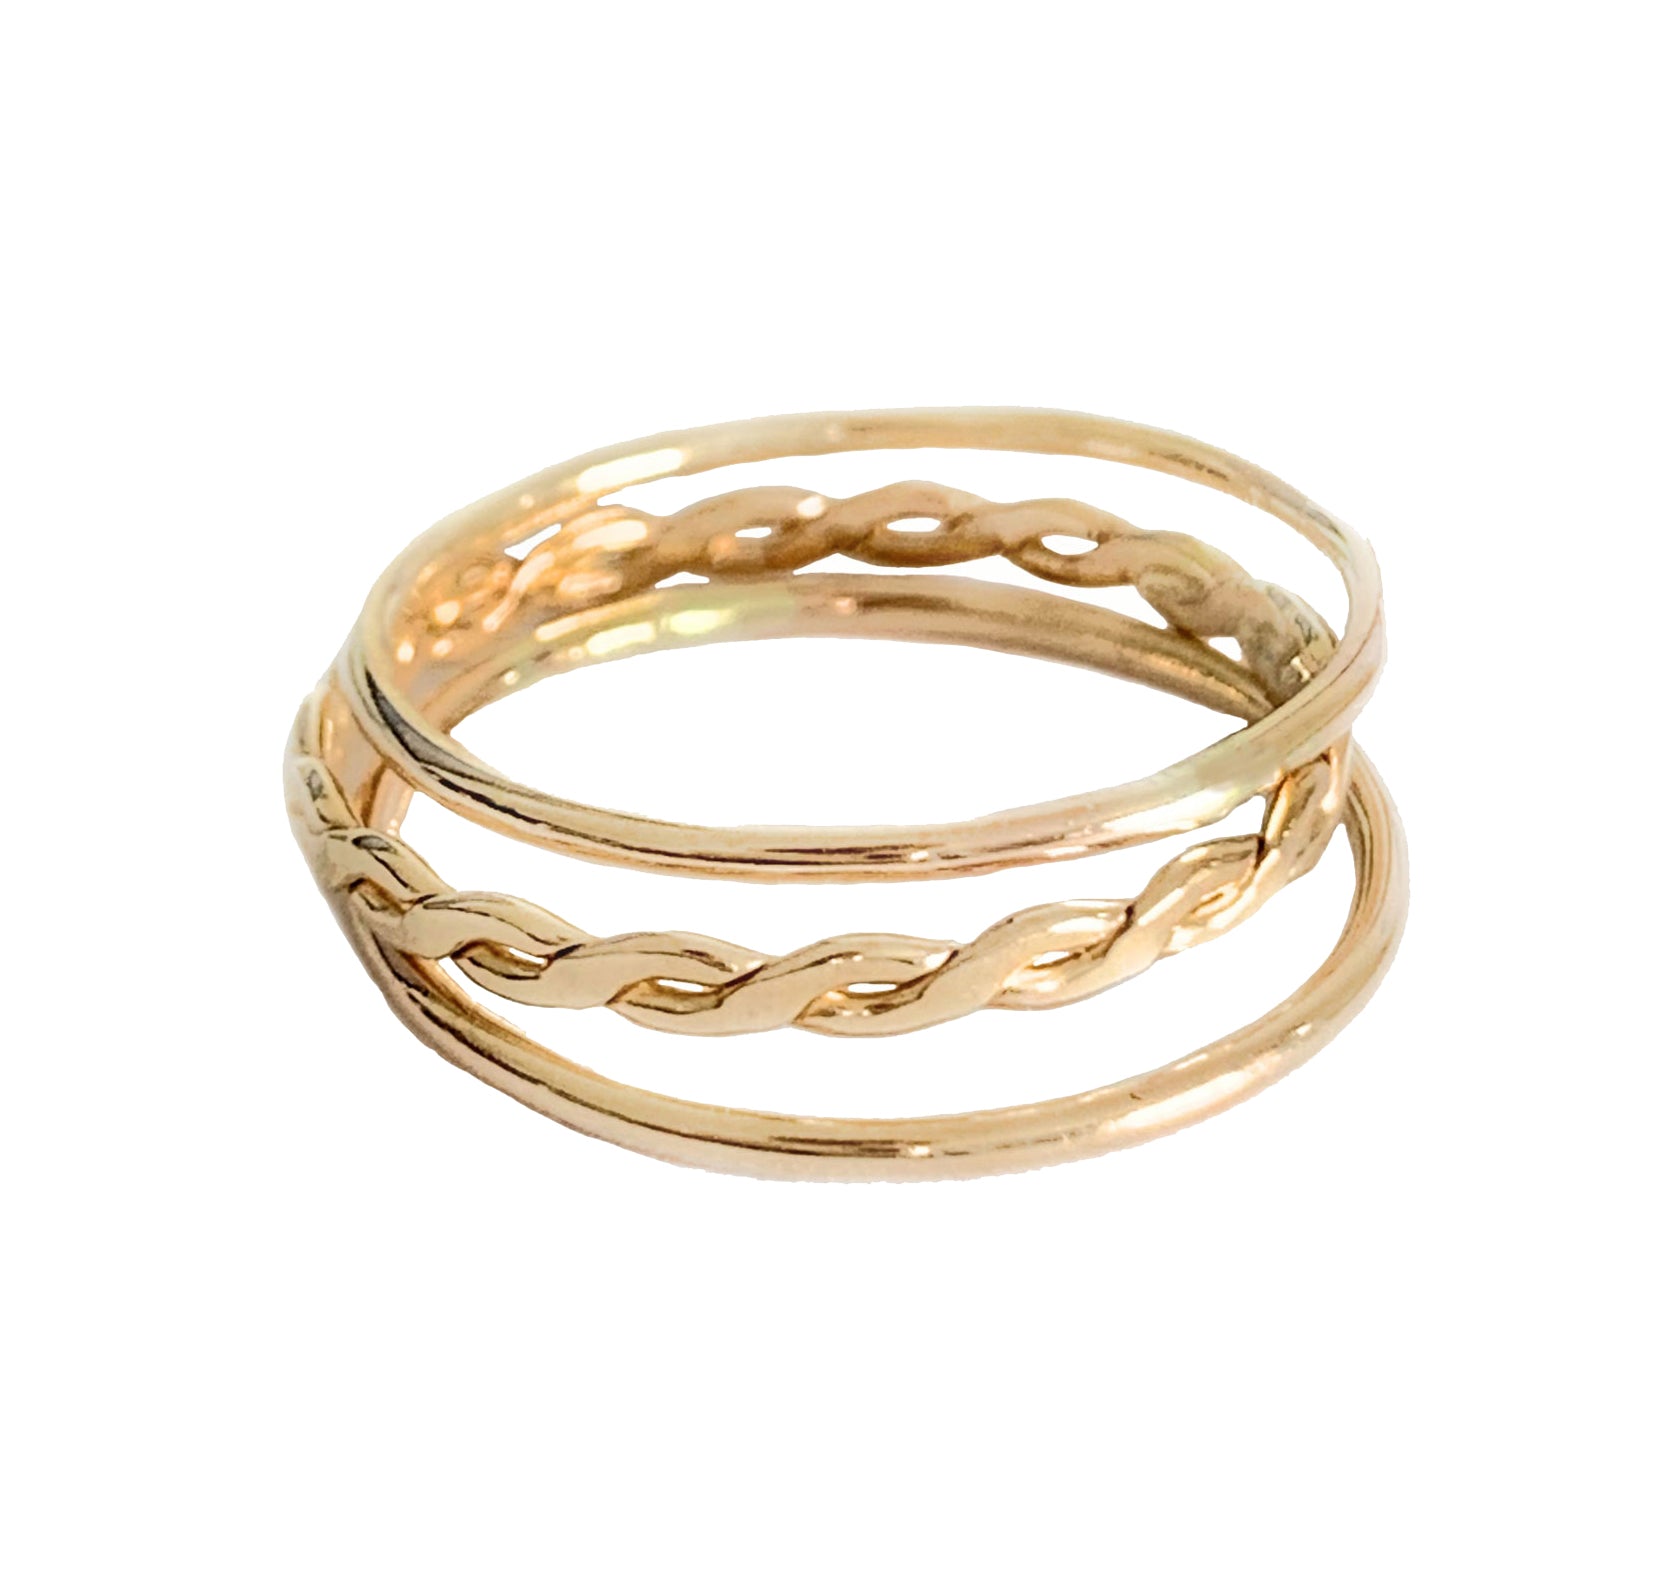 Skinny Band & Braid Stack Gold Fill Rings Up to Size 12!